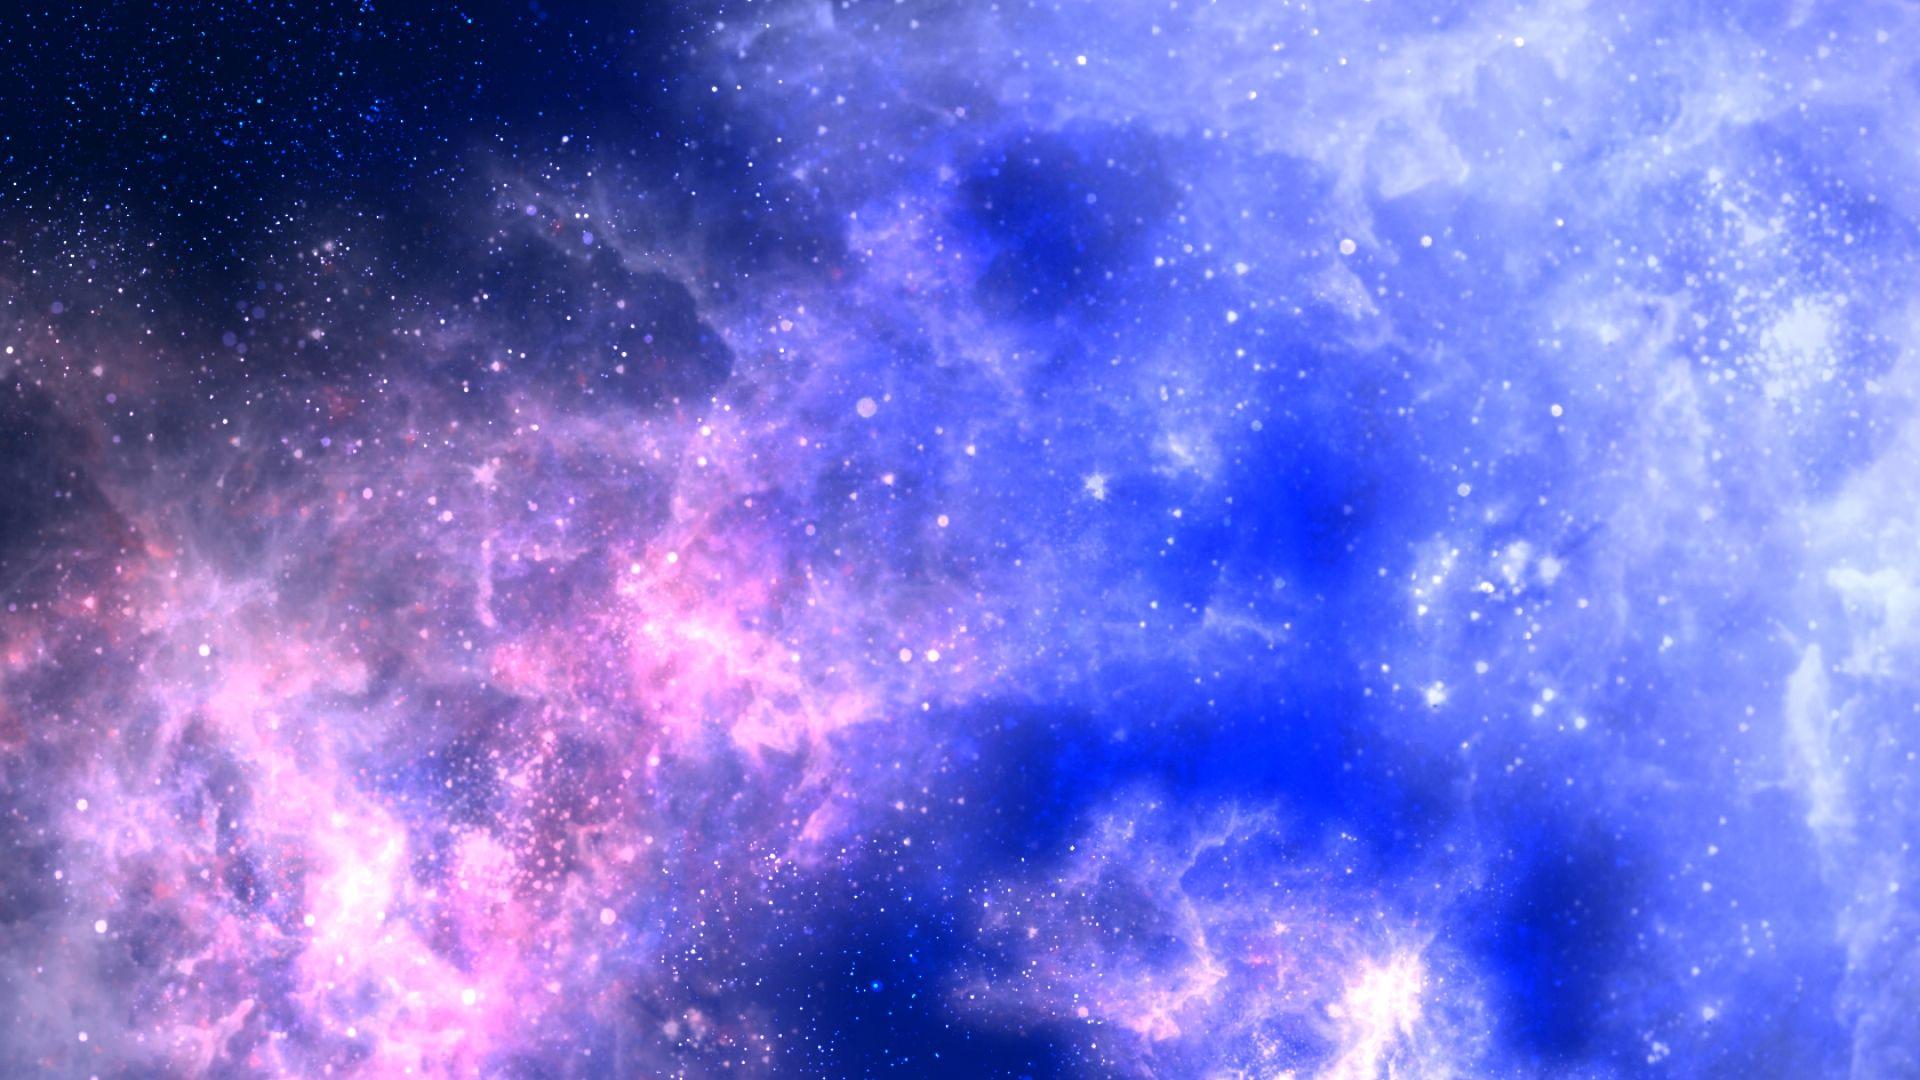 galaxy tumblr background HD 5. Background Check All